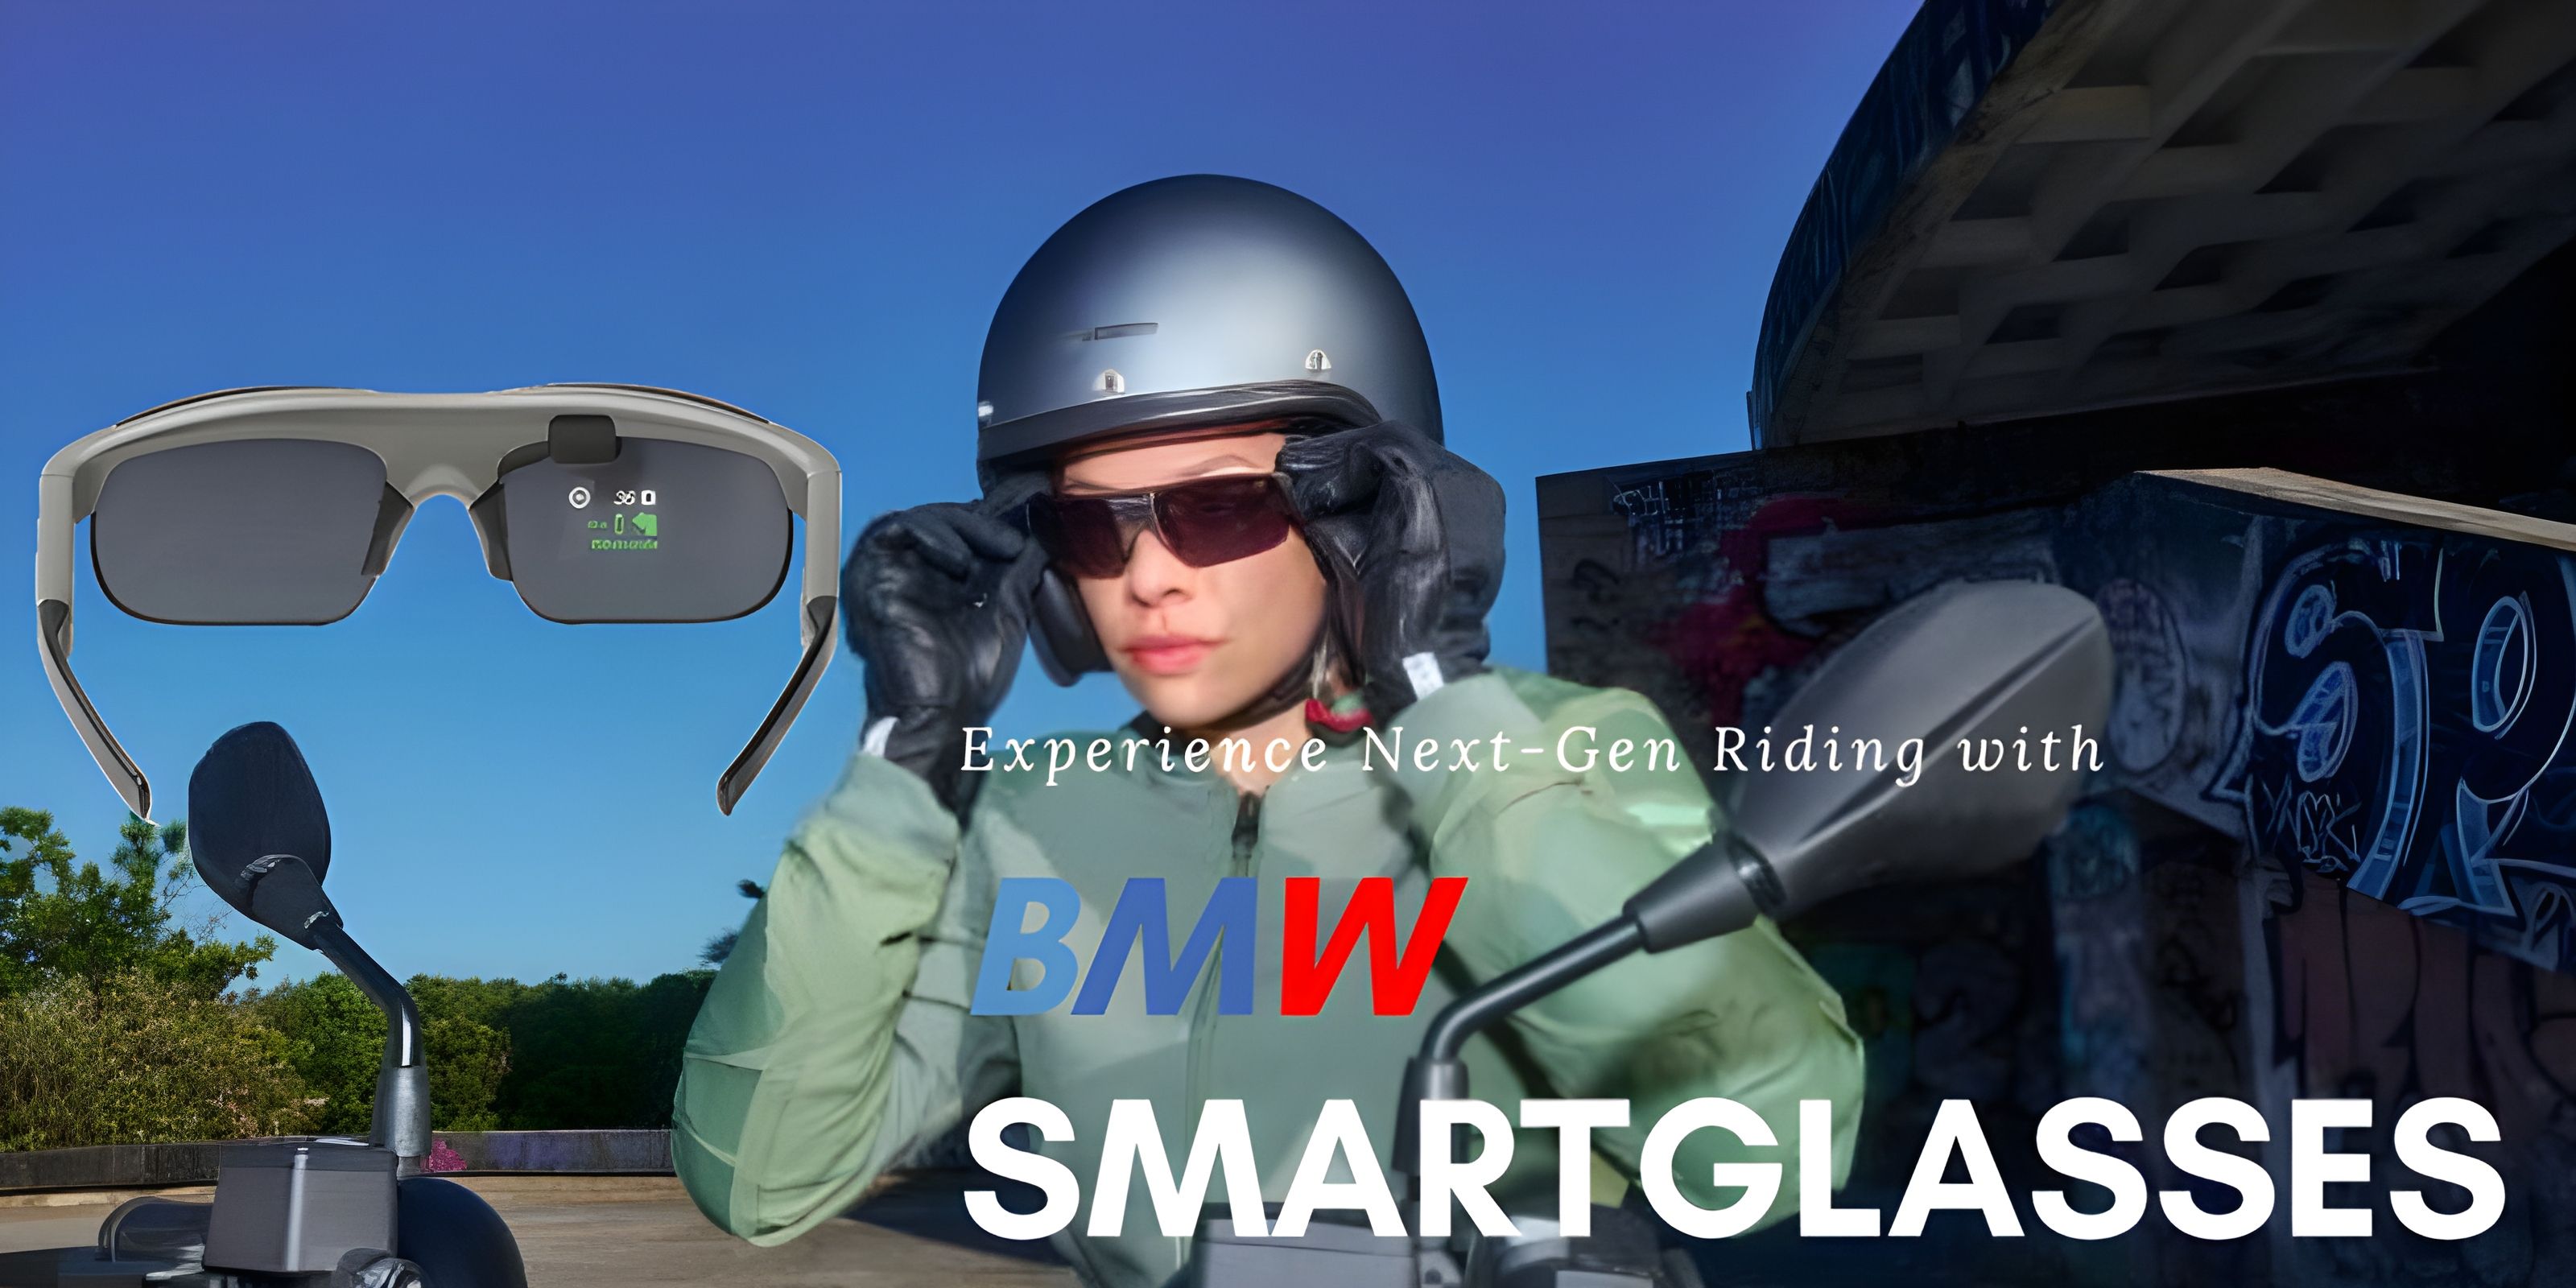 Experience Next-Gen Riding with BMW Smartglasses